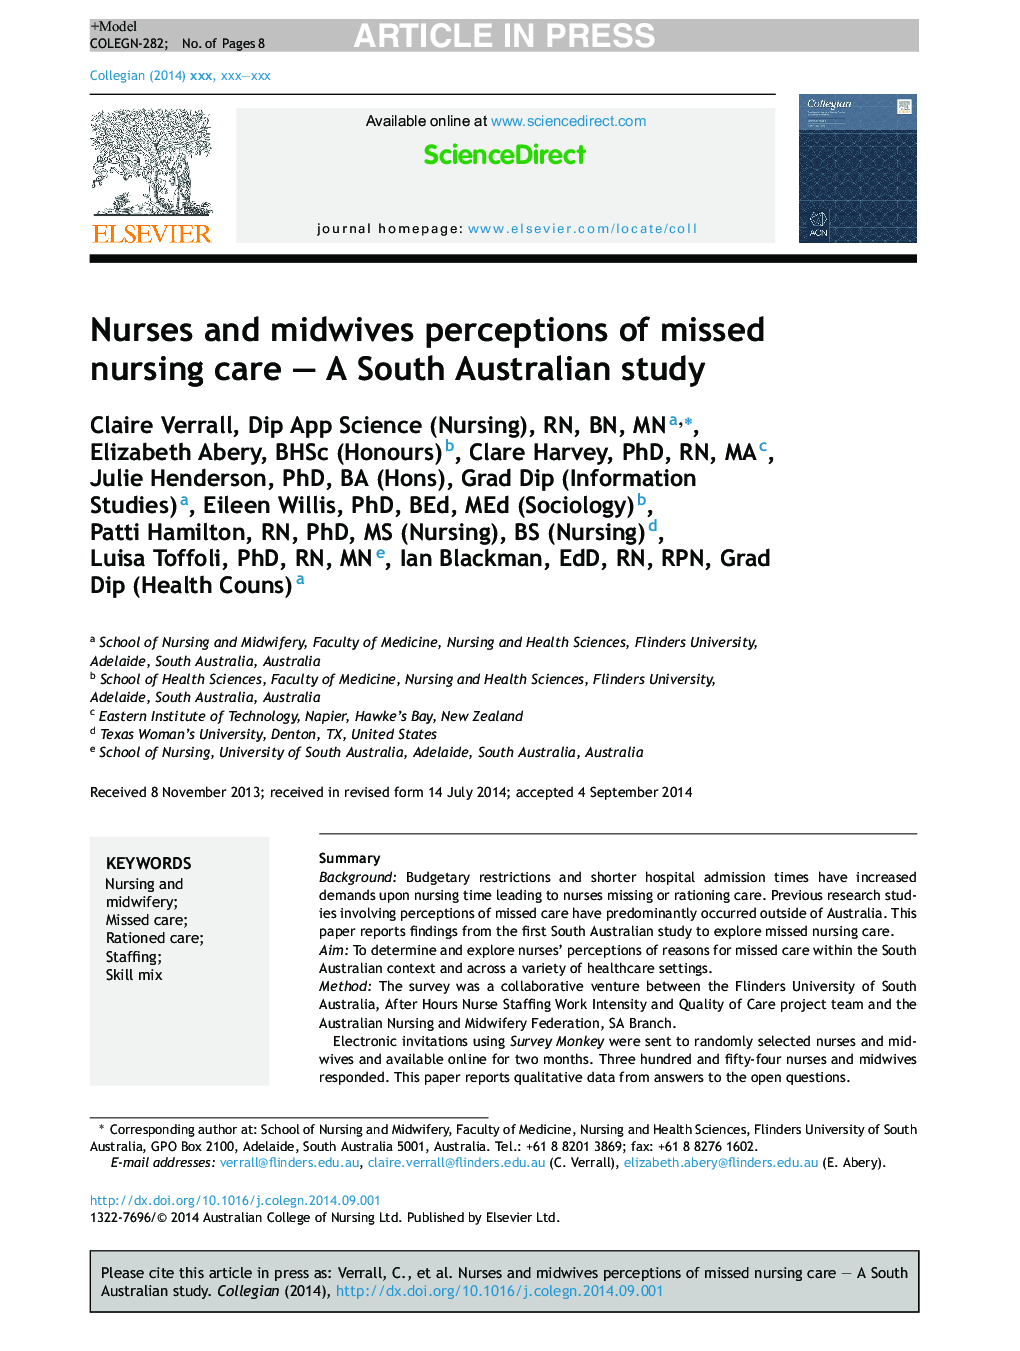 Nurses and midwives perceptions of missed nursing care - A South Australian study